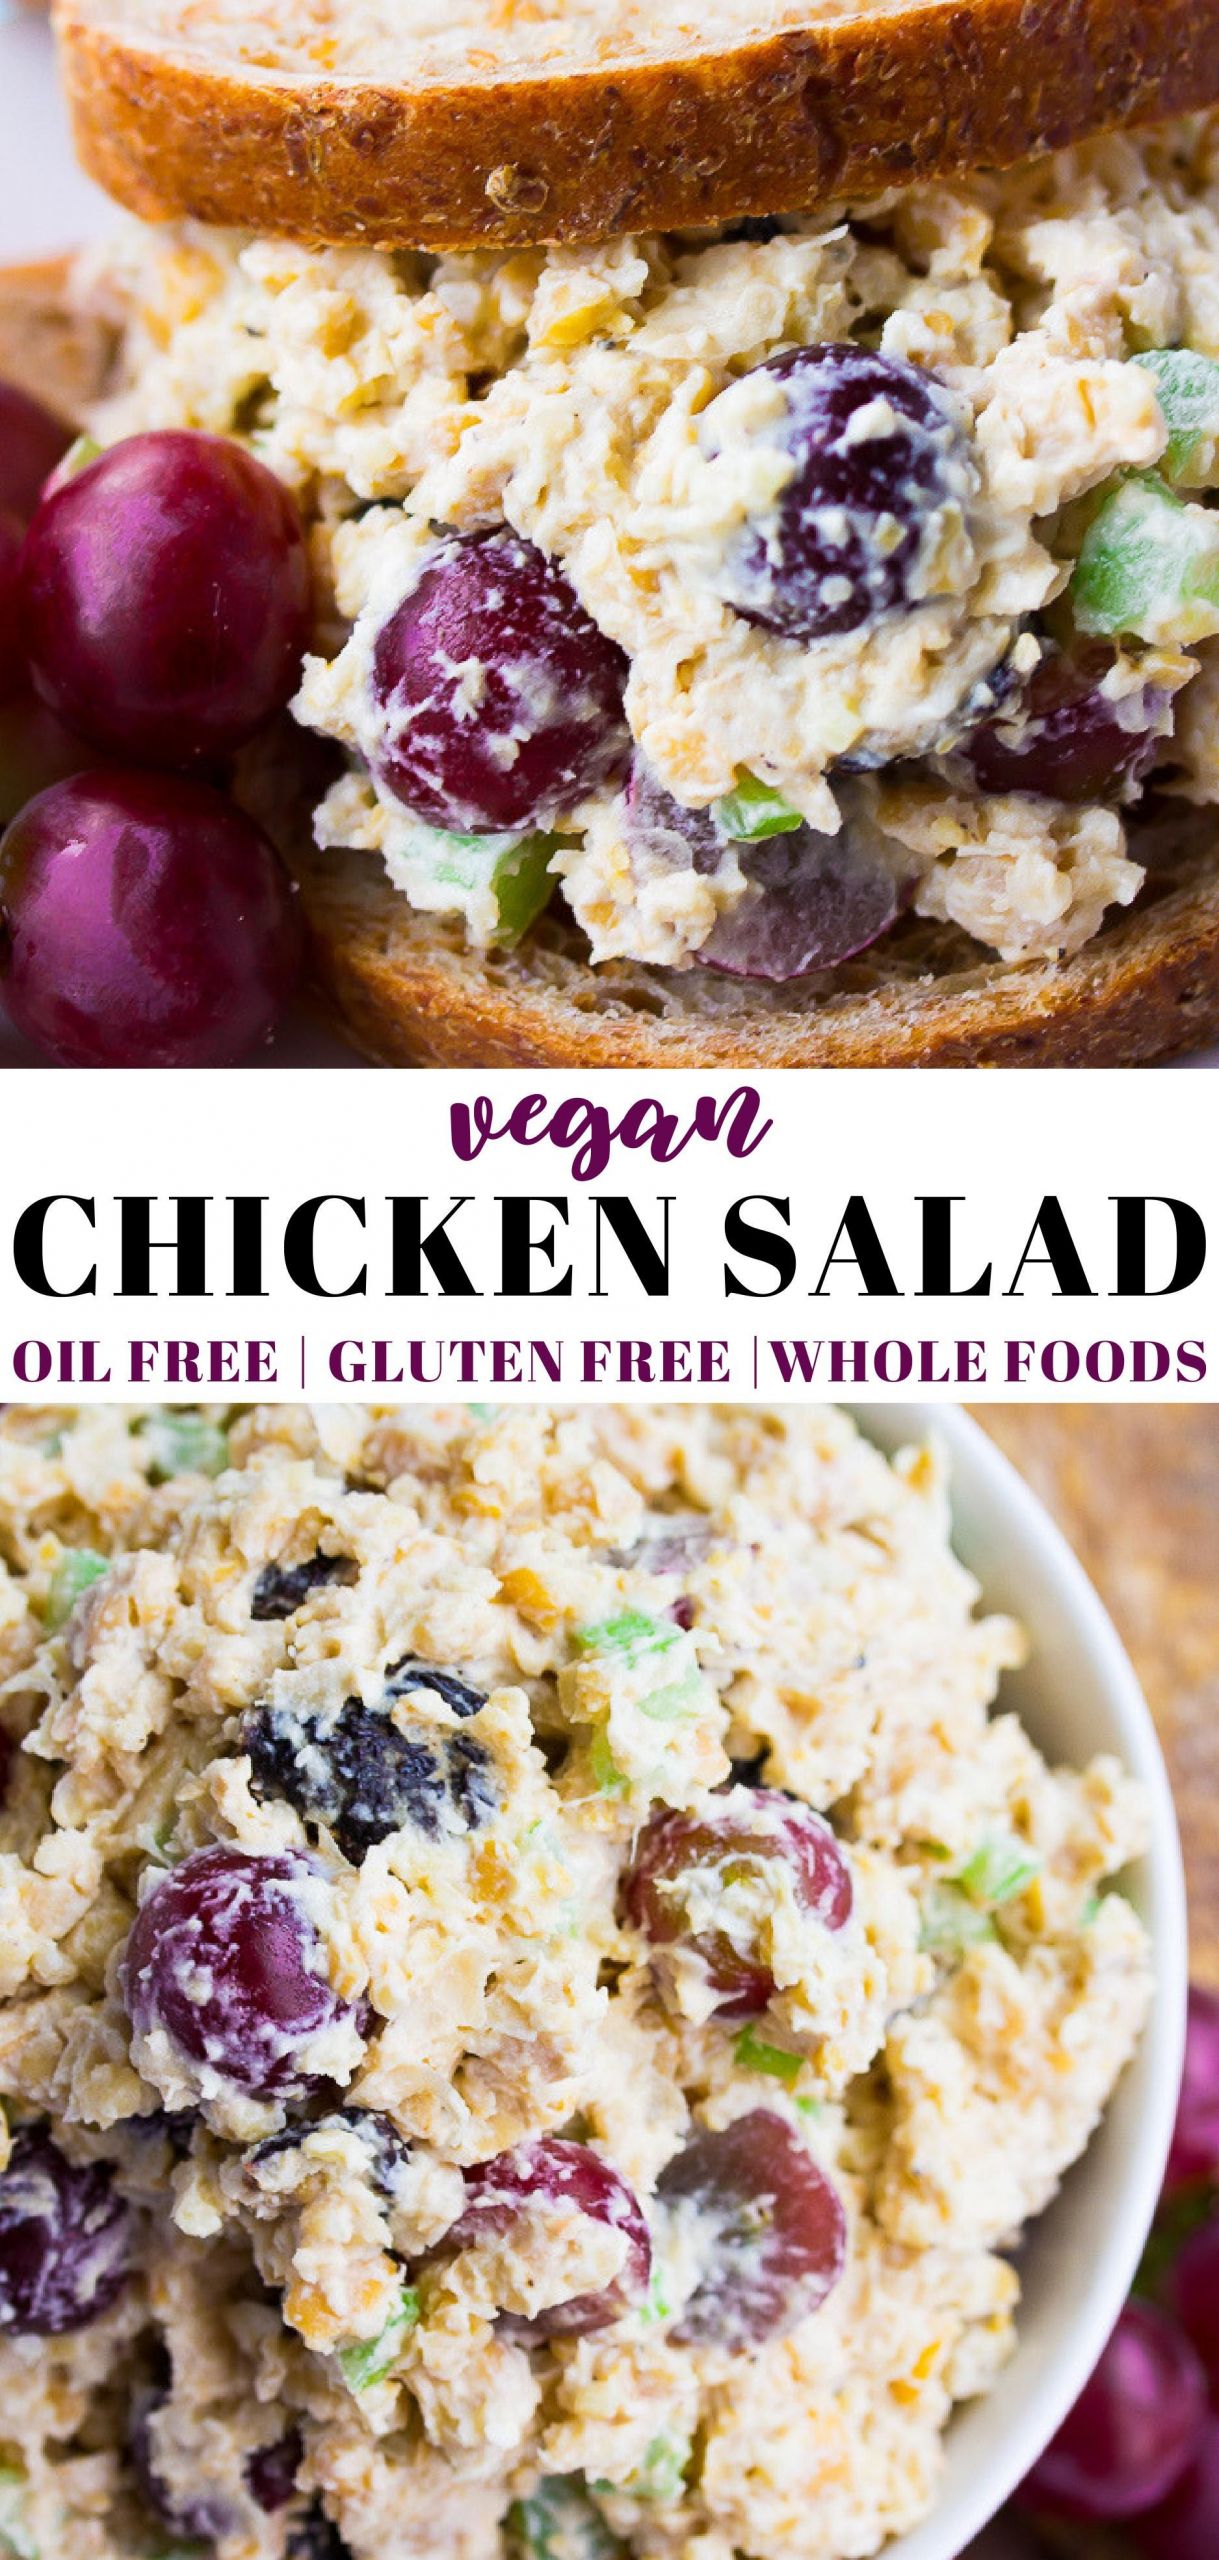 Whole Foods Vegan Chicken Salad
 Healthy and easy Vegan Chicken Salad made with all whole